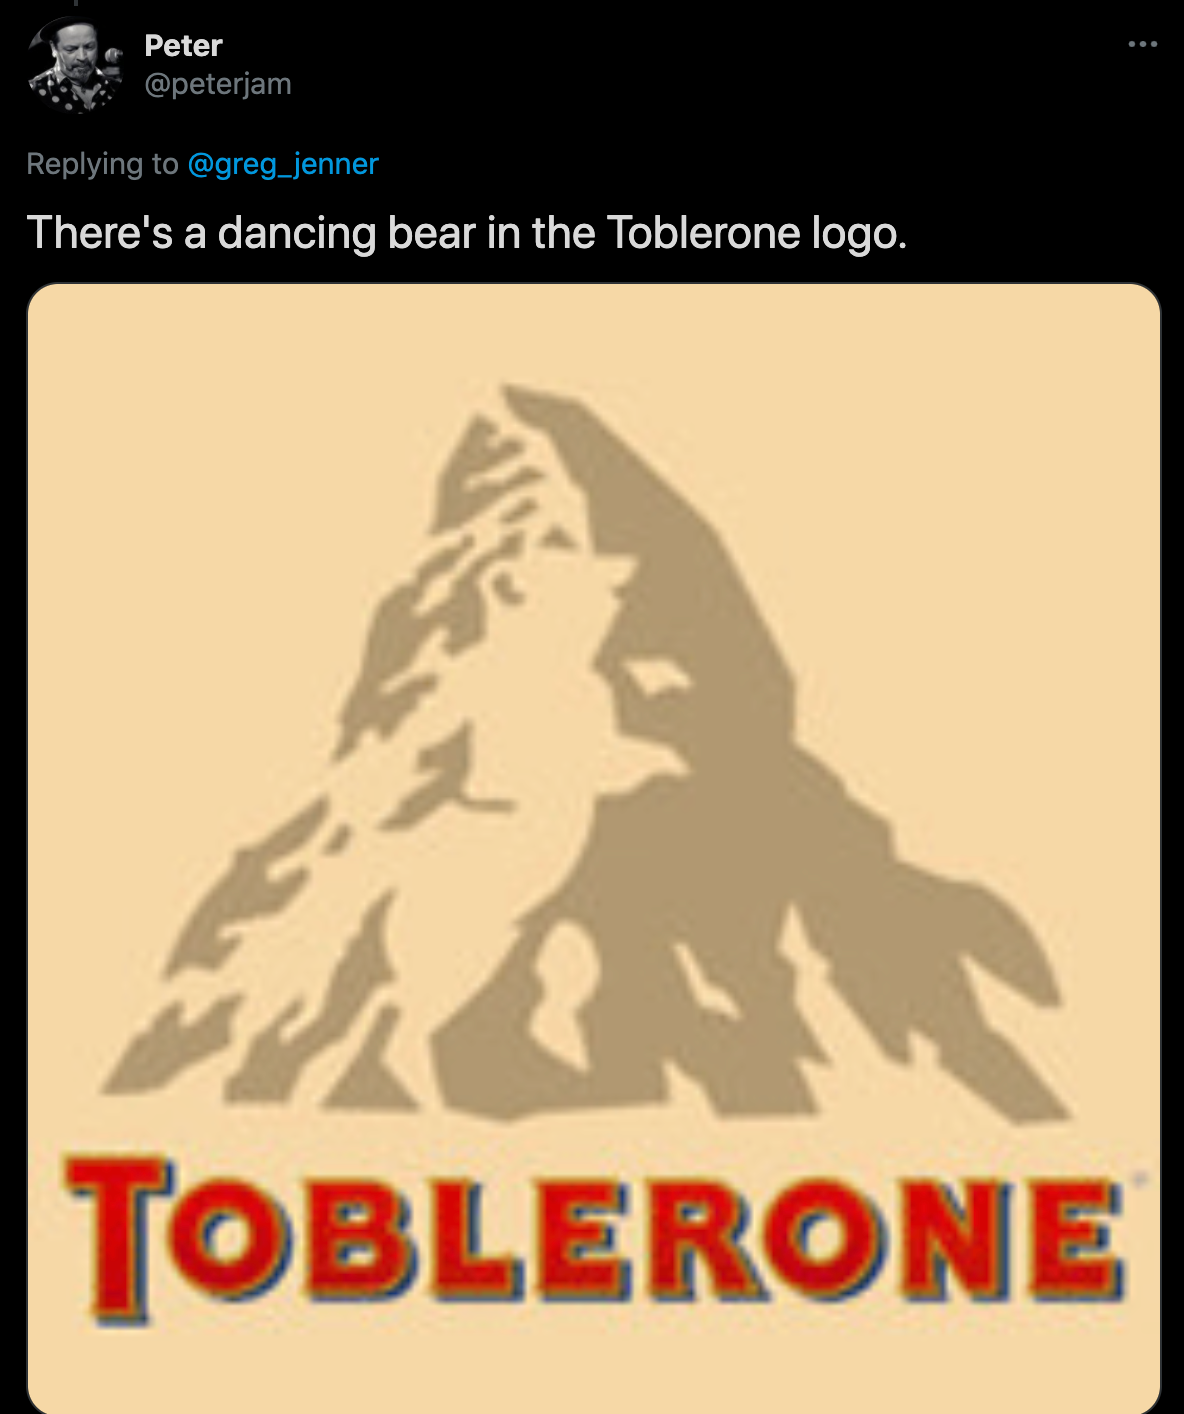 cool facts - There's a dancing bear in the Toblerone logo.